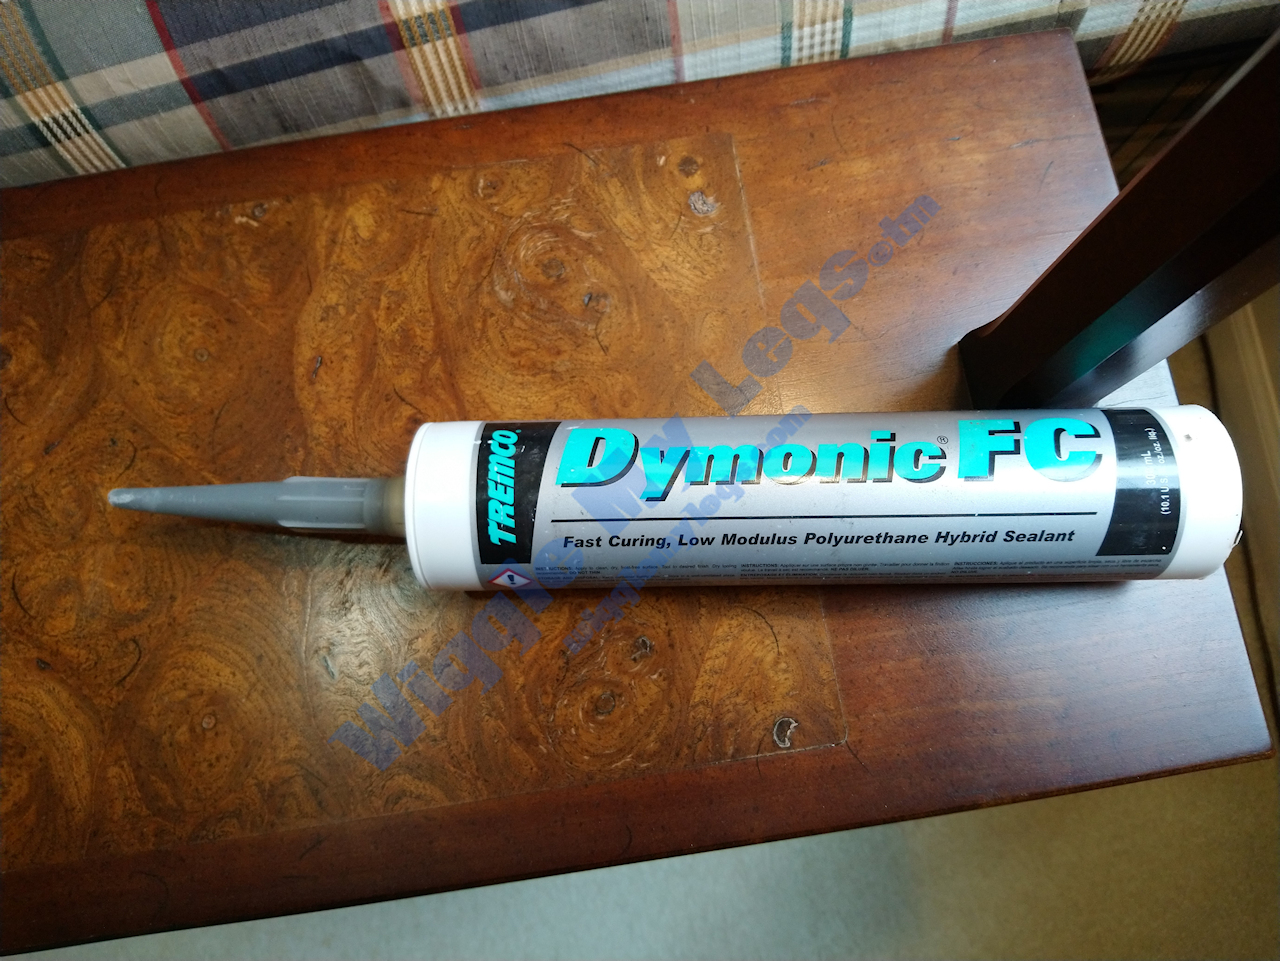 Picture of the caulk for this repair, which is Dymonic FC from Tremco, a fast curing, low modulus, Polyurethane hybrid